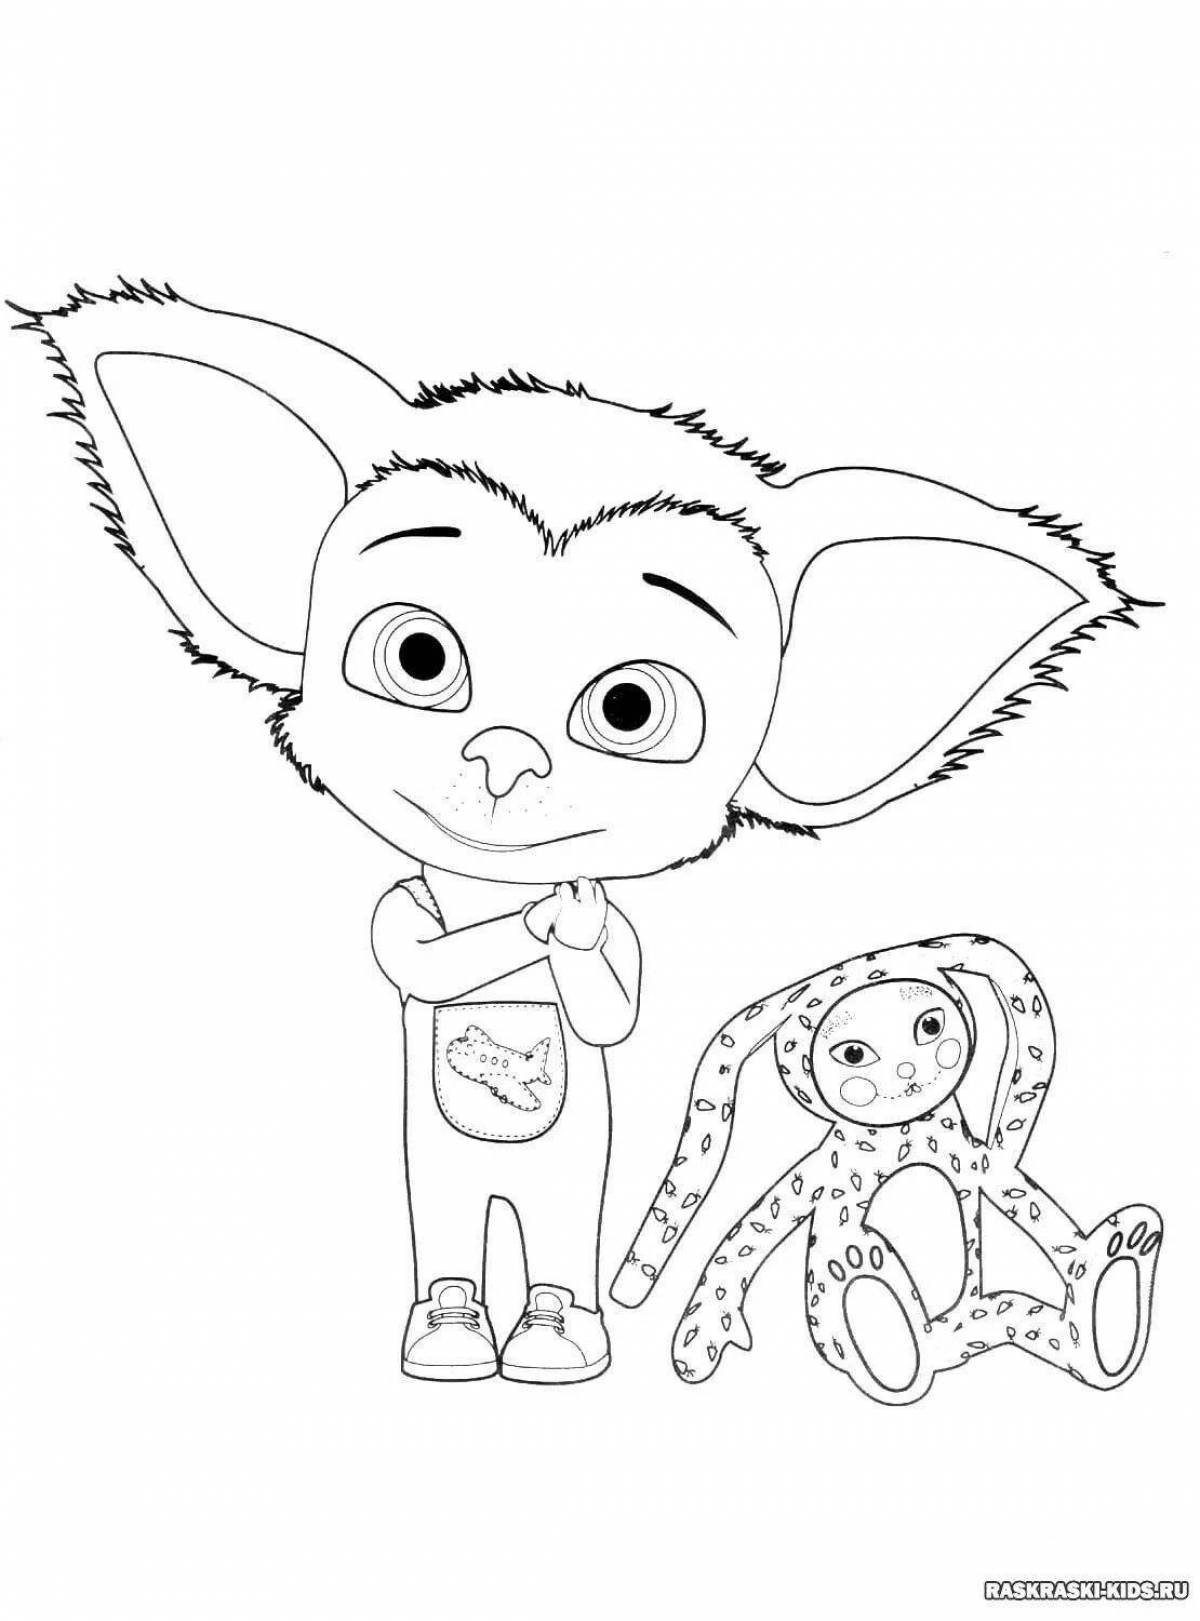 Wonderful barboskin coloring pages for girls